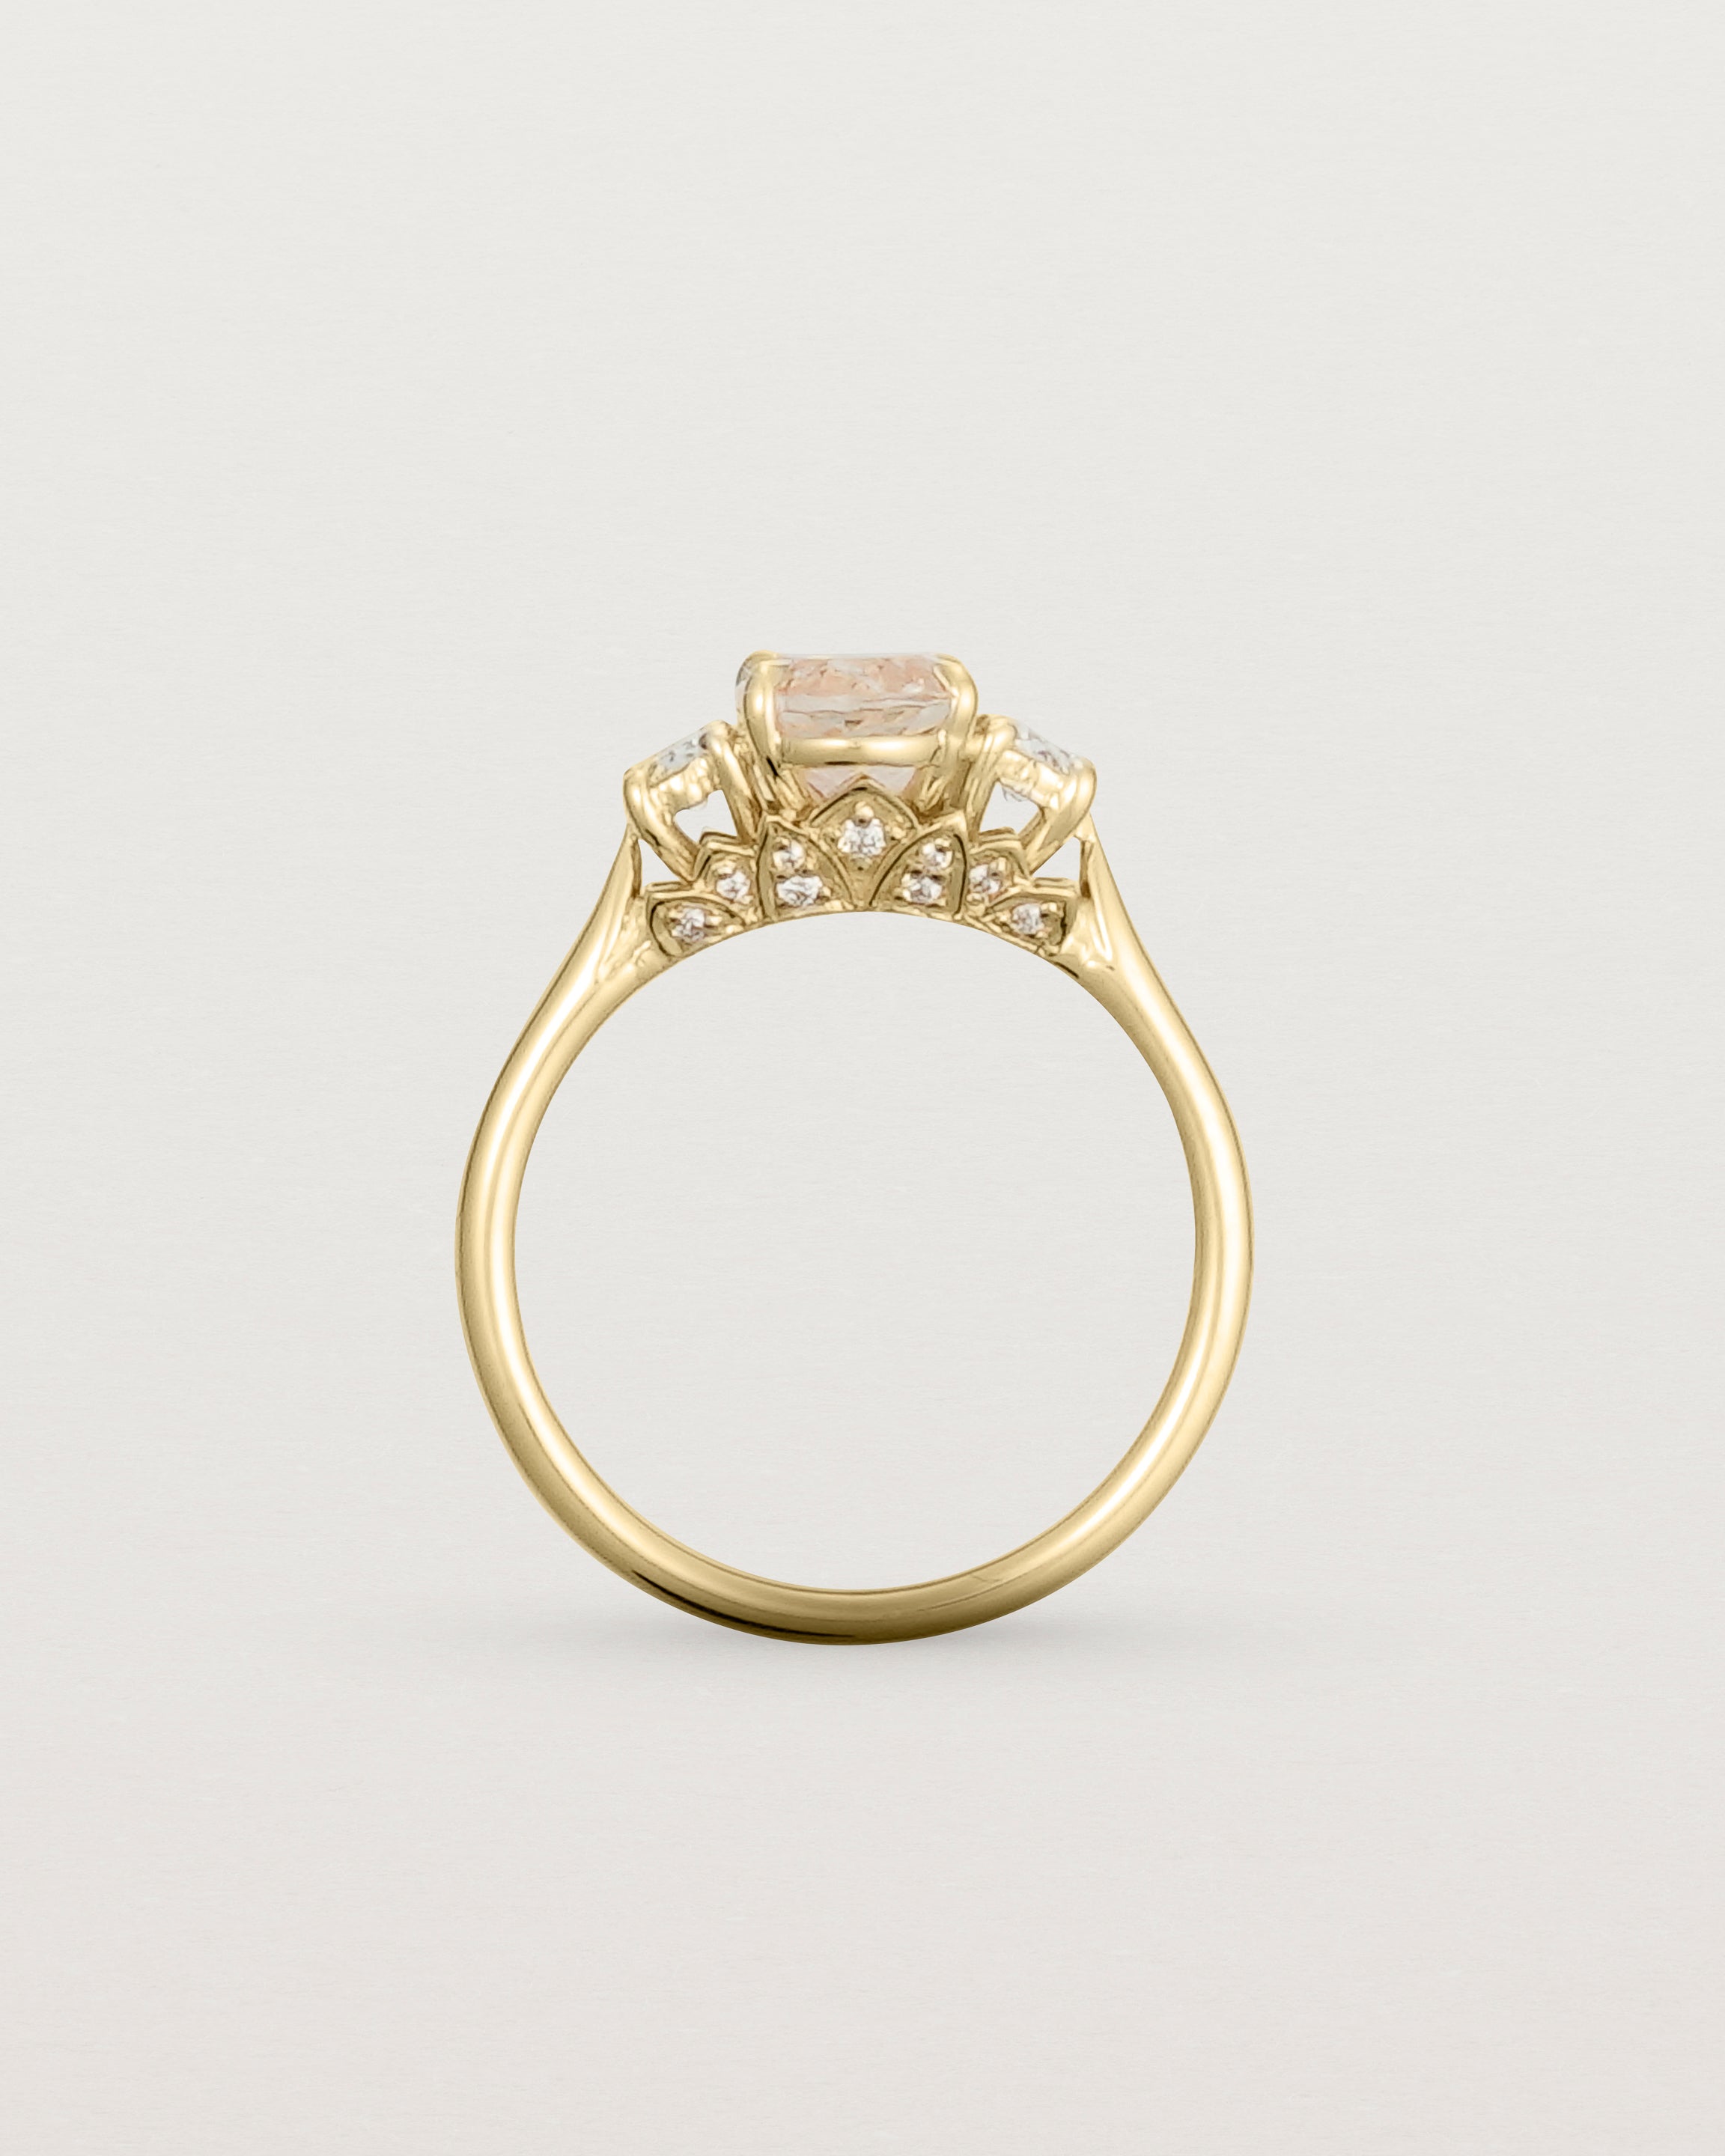 Standing view of the Laurel Oval Trio Ring | Savannah Sunstone | Yellow Gold.